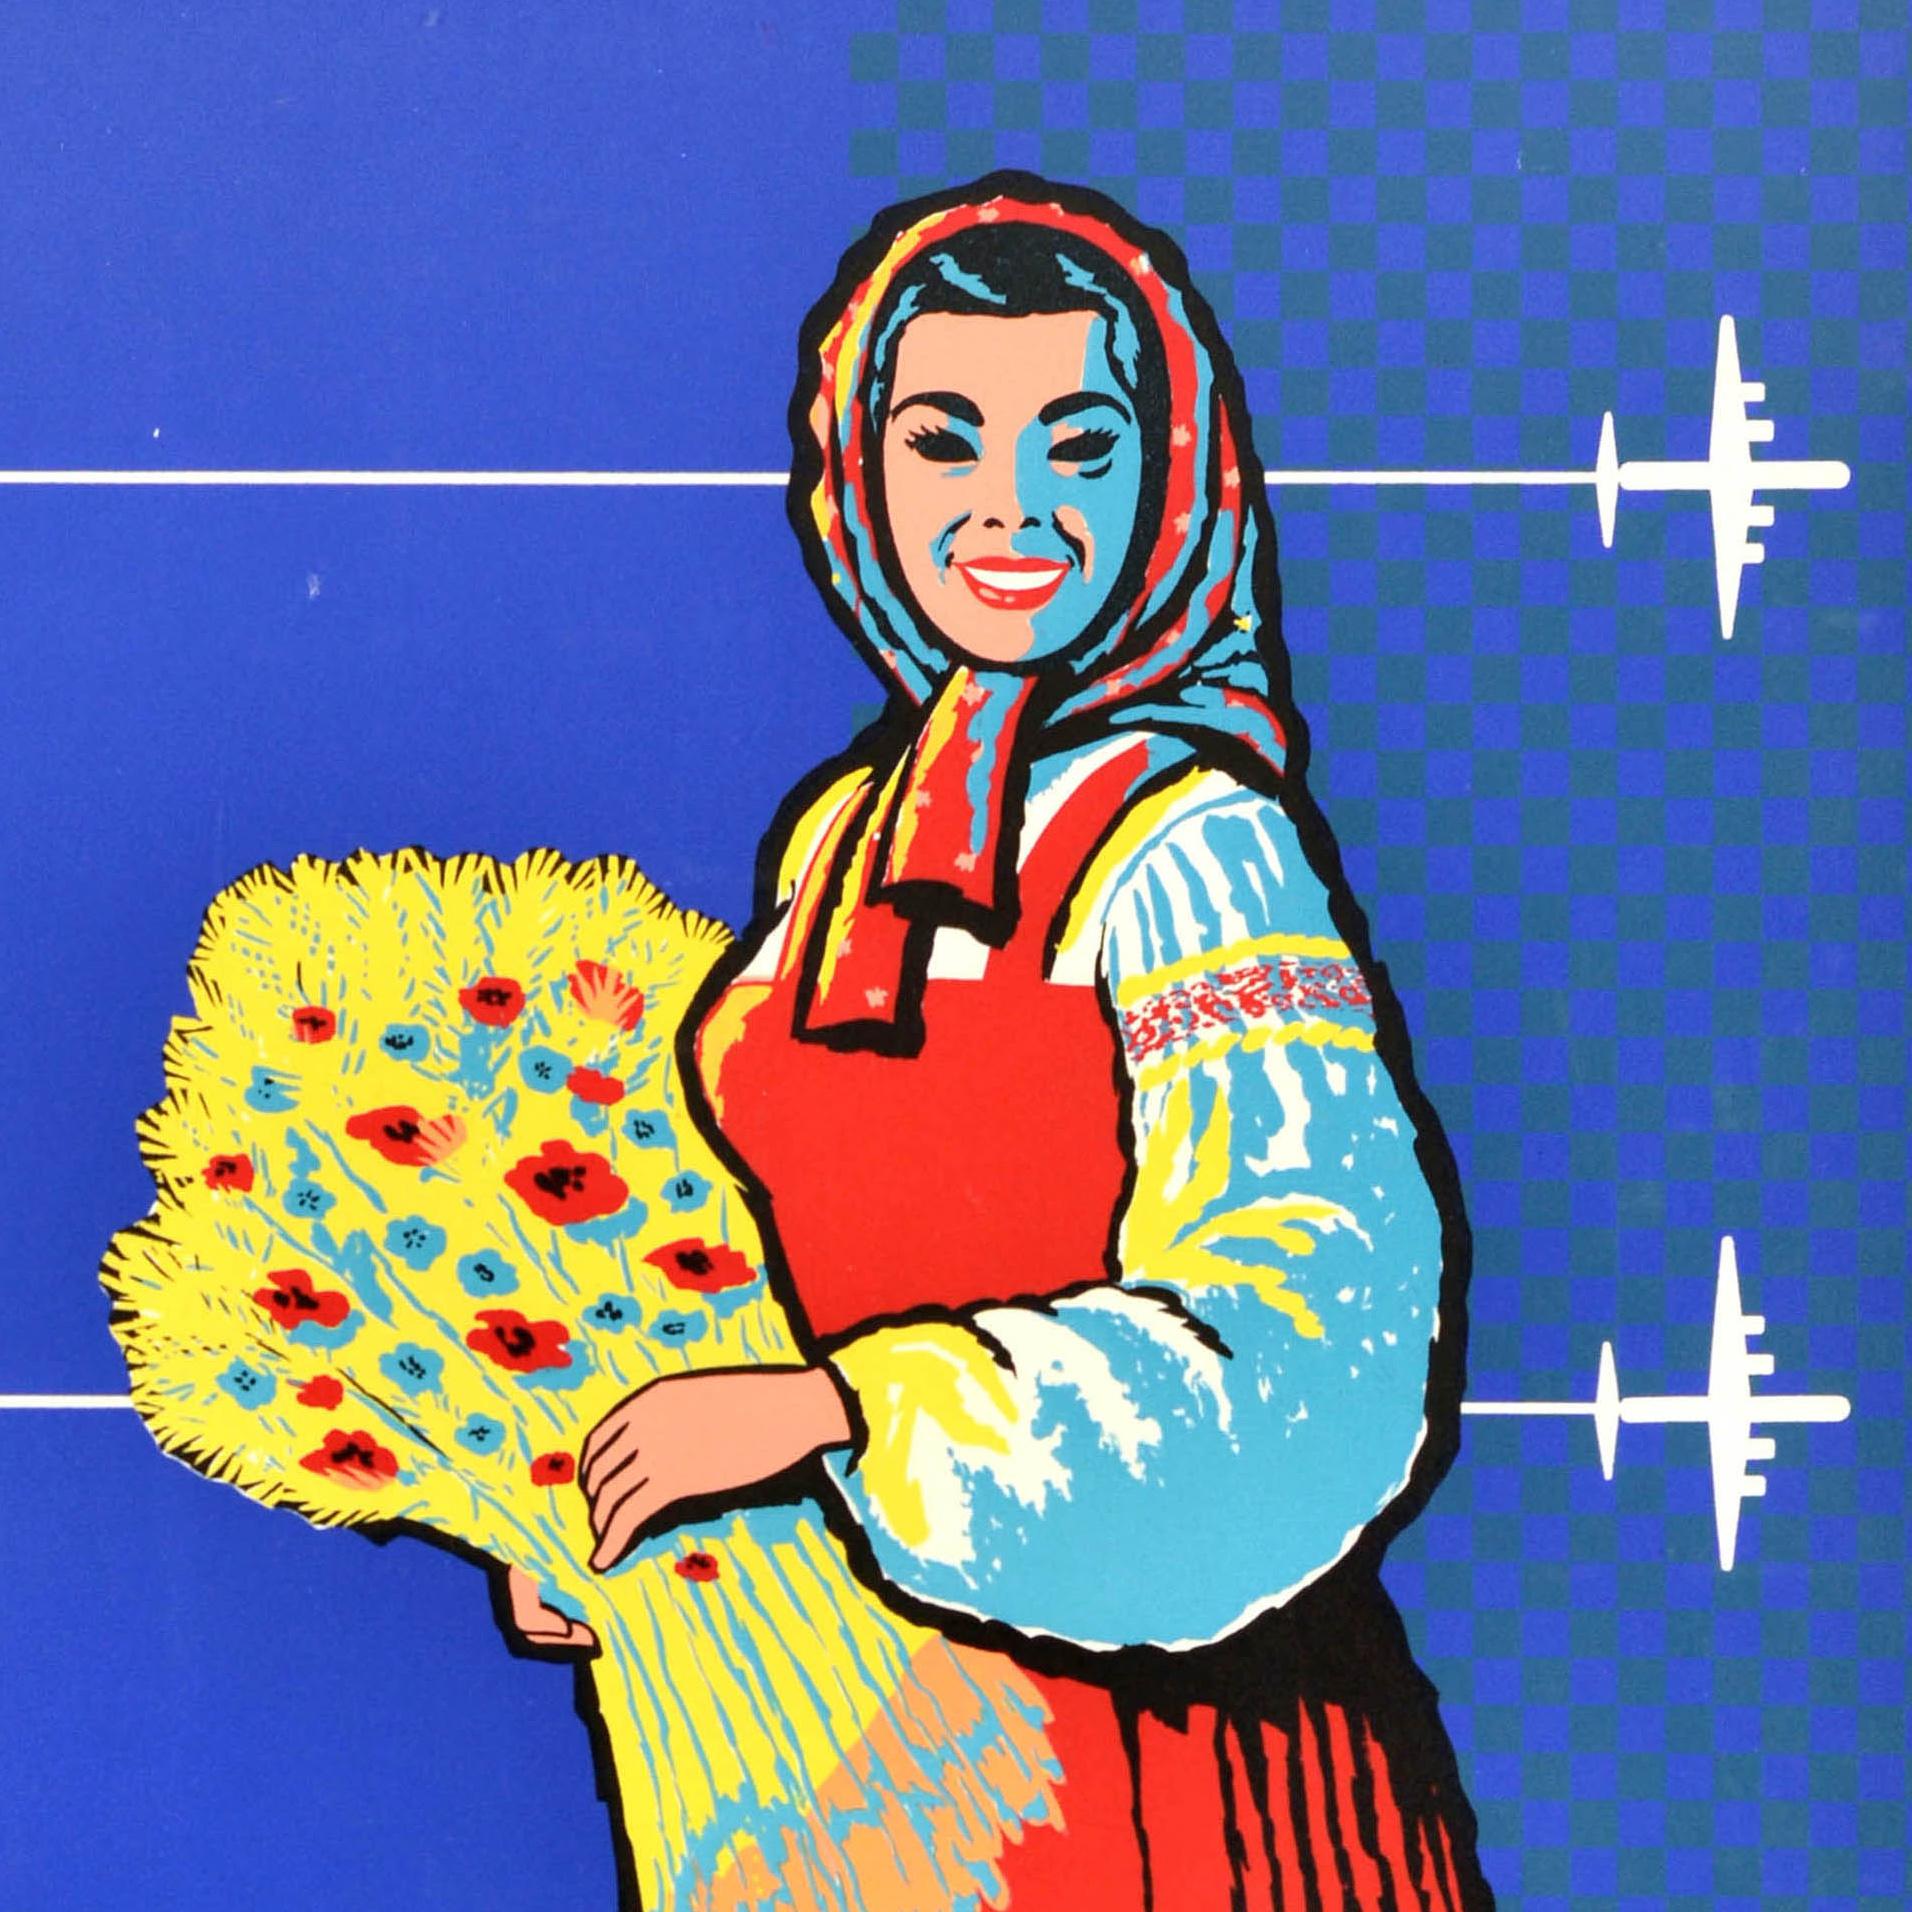 Original vintage travel advertising poster - Naar Rusland met Sabena / To Russia with Sabena (the national airline of Belgium from 1923-2001) featuring a mid-century design showing a smiling lady in traditional Russian clothing and headscarf holding